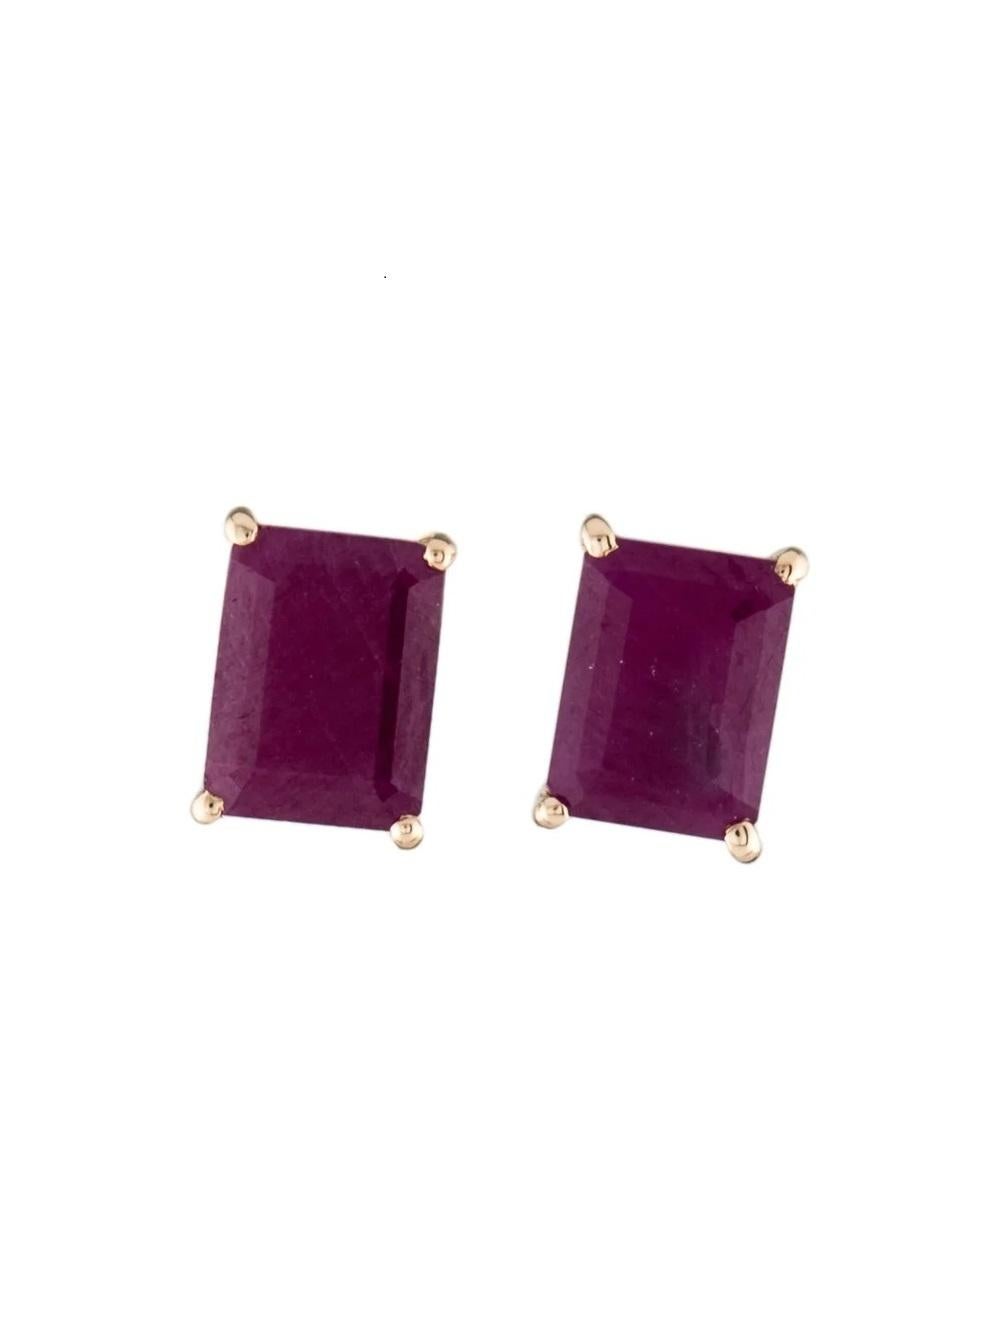 14K 3.12ctw Ruby Stud Earrings: Timeless Elegance in Brilliant Red Gems In New Condition For Sale In Holtsville, NY